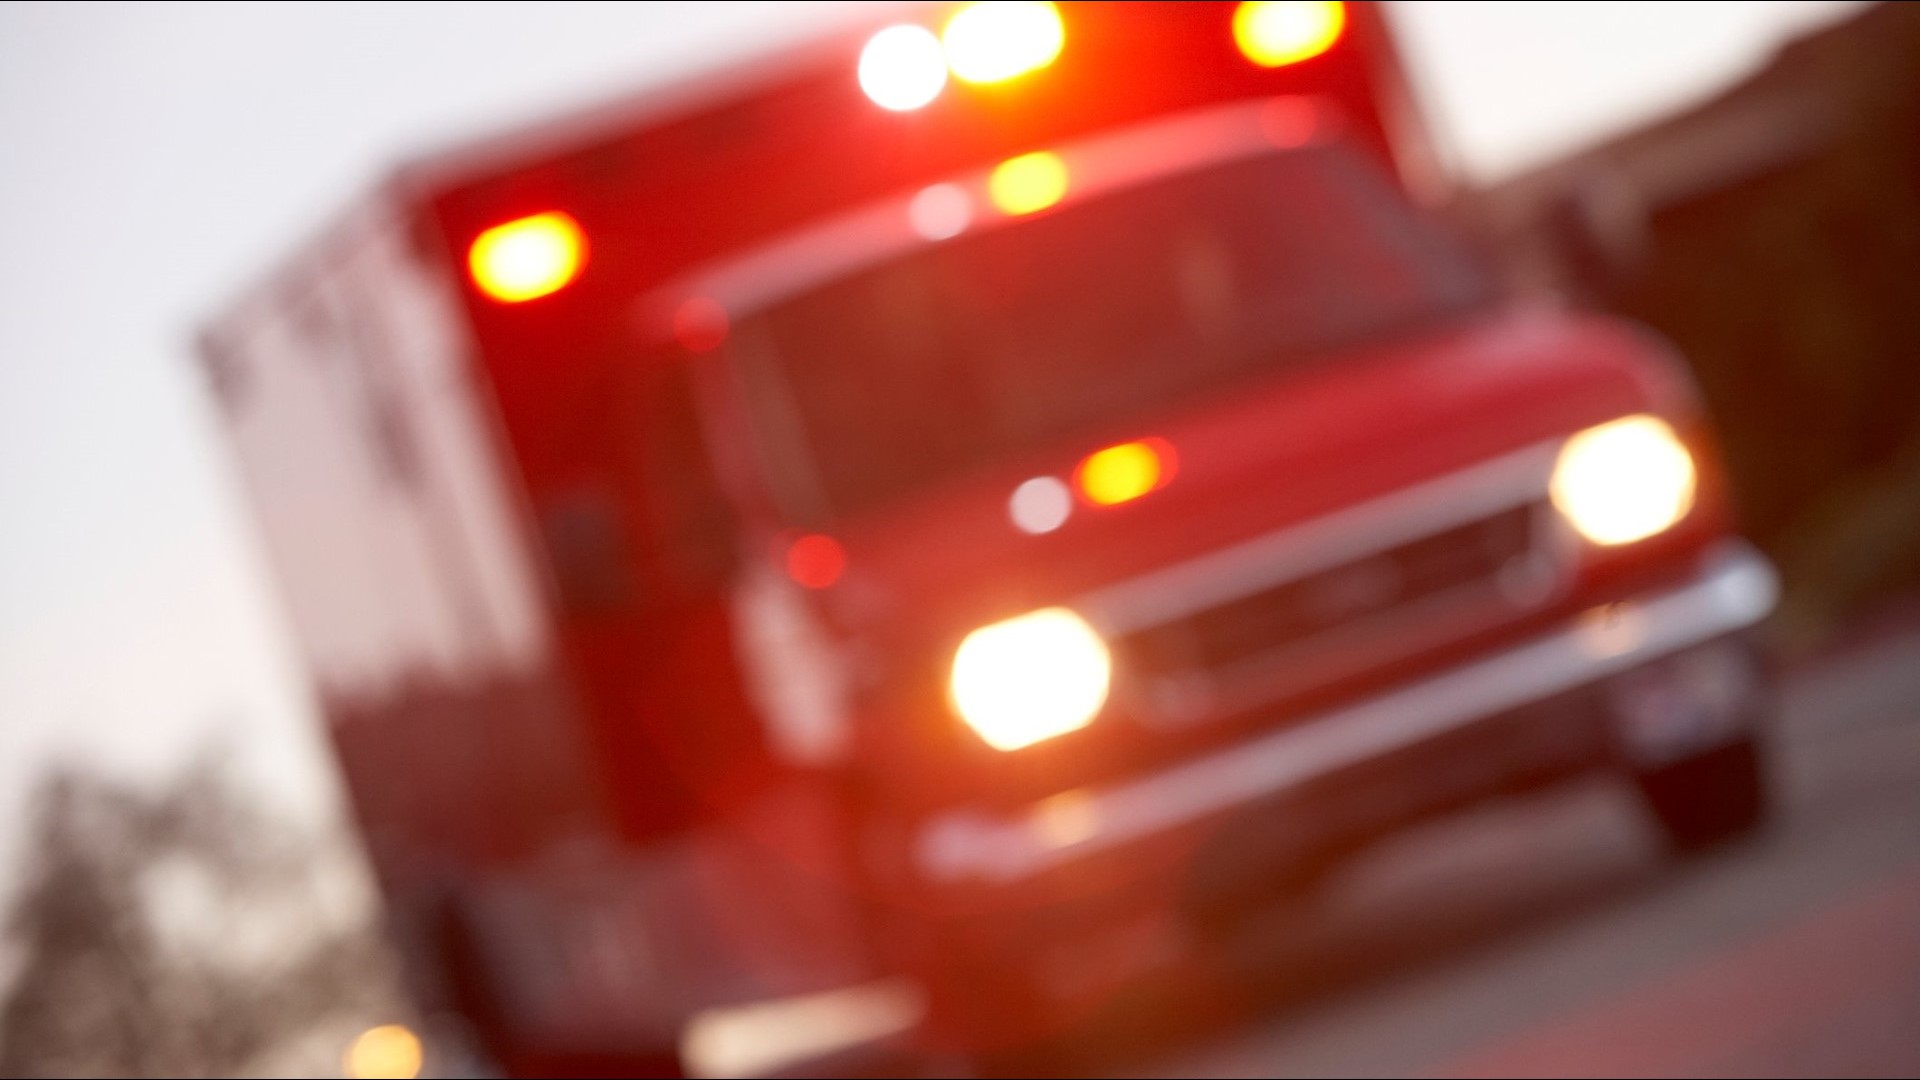 A South Carolina coroner says the man's car crossed the median and struck a tractor trailer head-on after crashing with another vehicle.